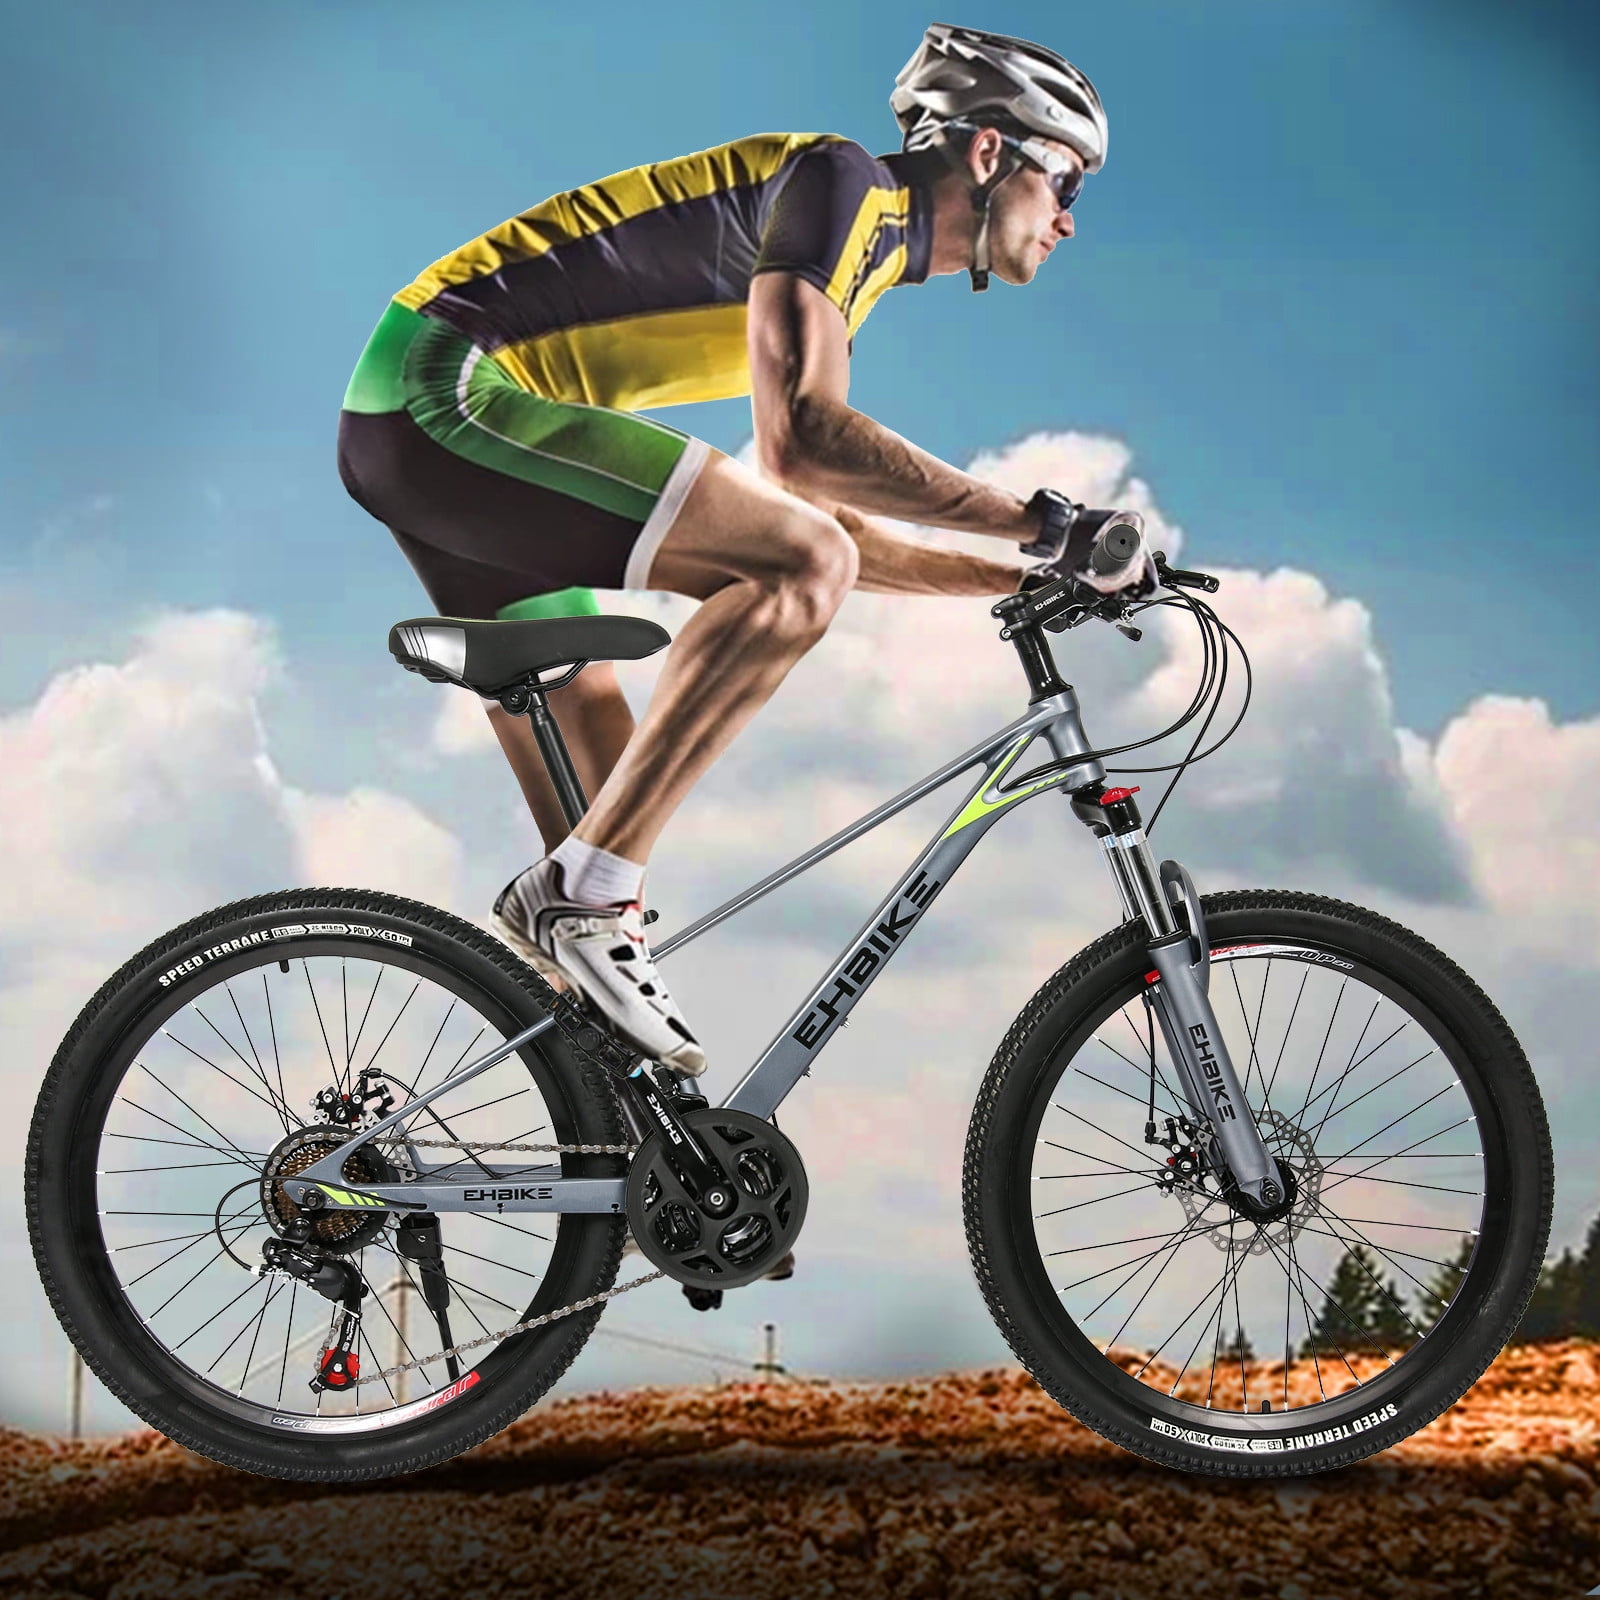 Details about   Super Light Mountain Bike Full Suspension 21 Speed Racing Bike Off-road Bicycle 